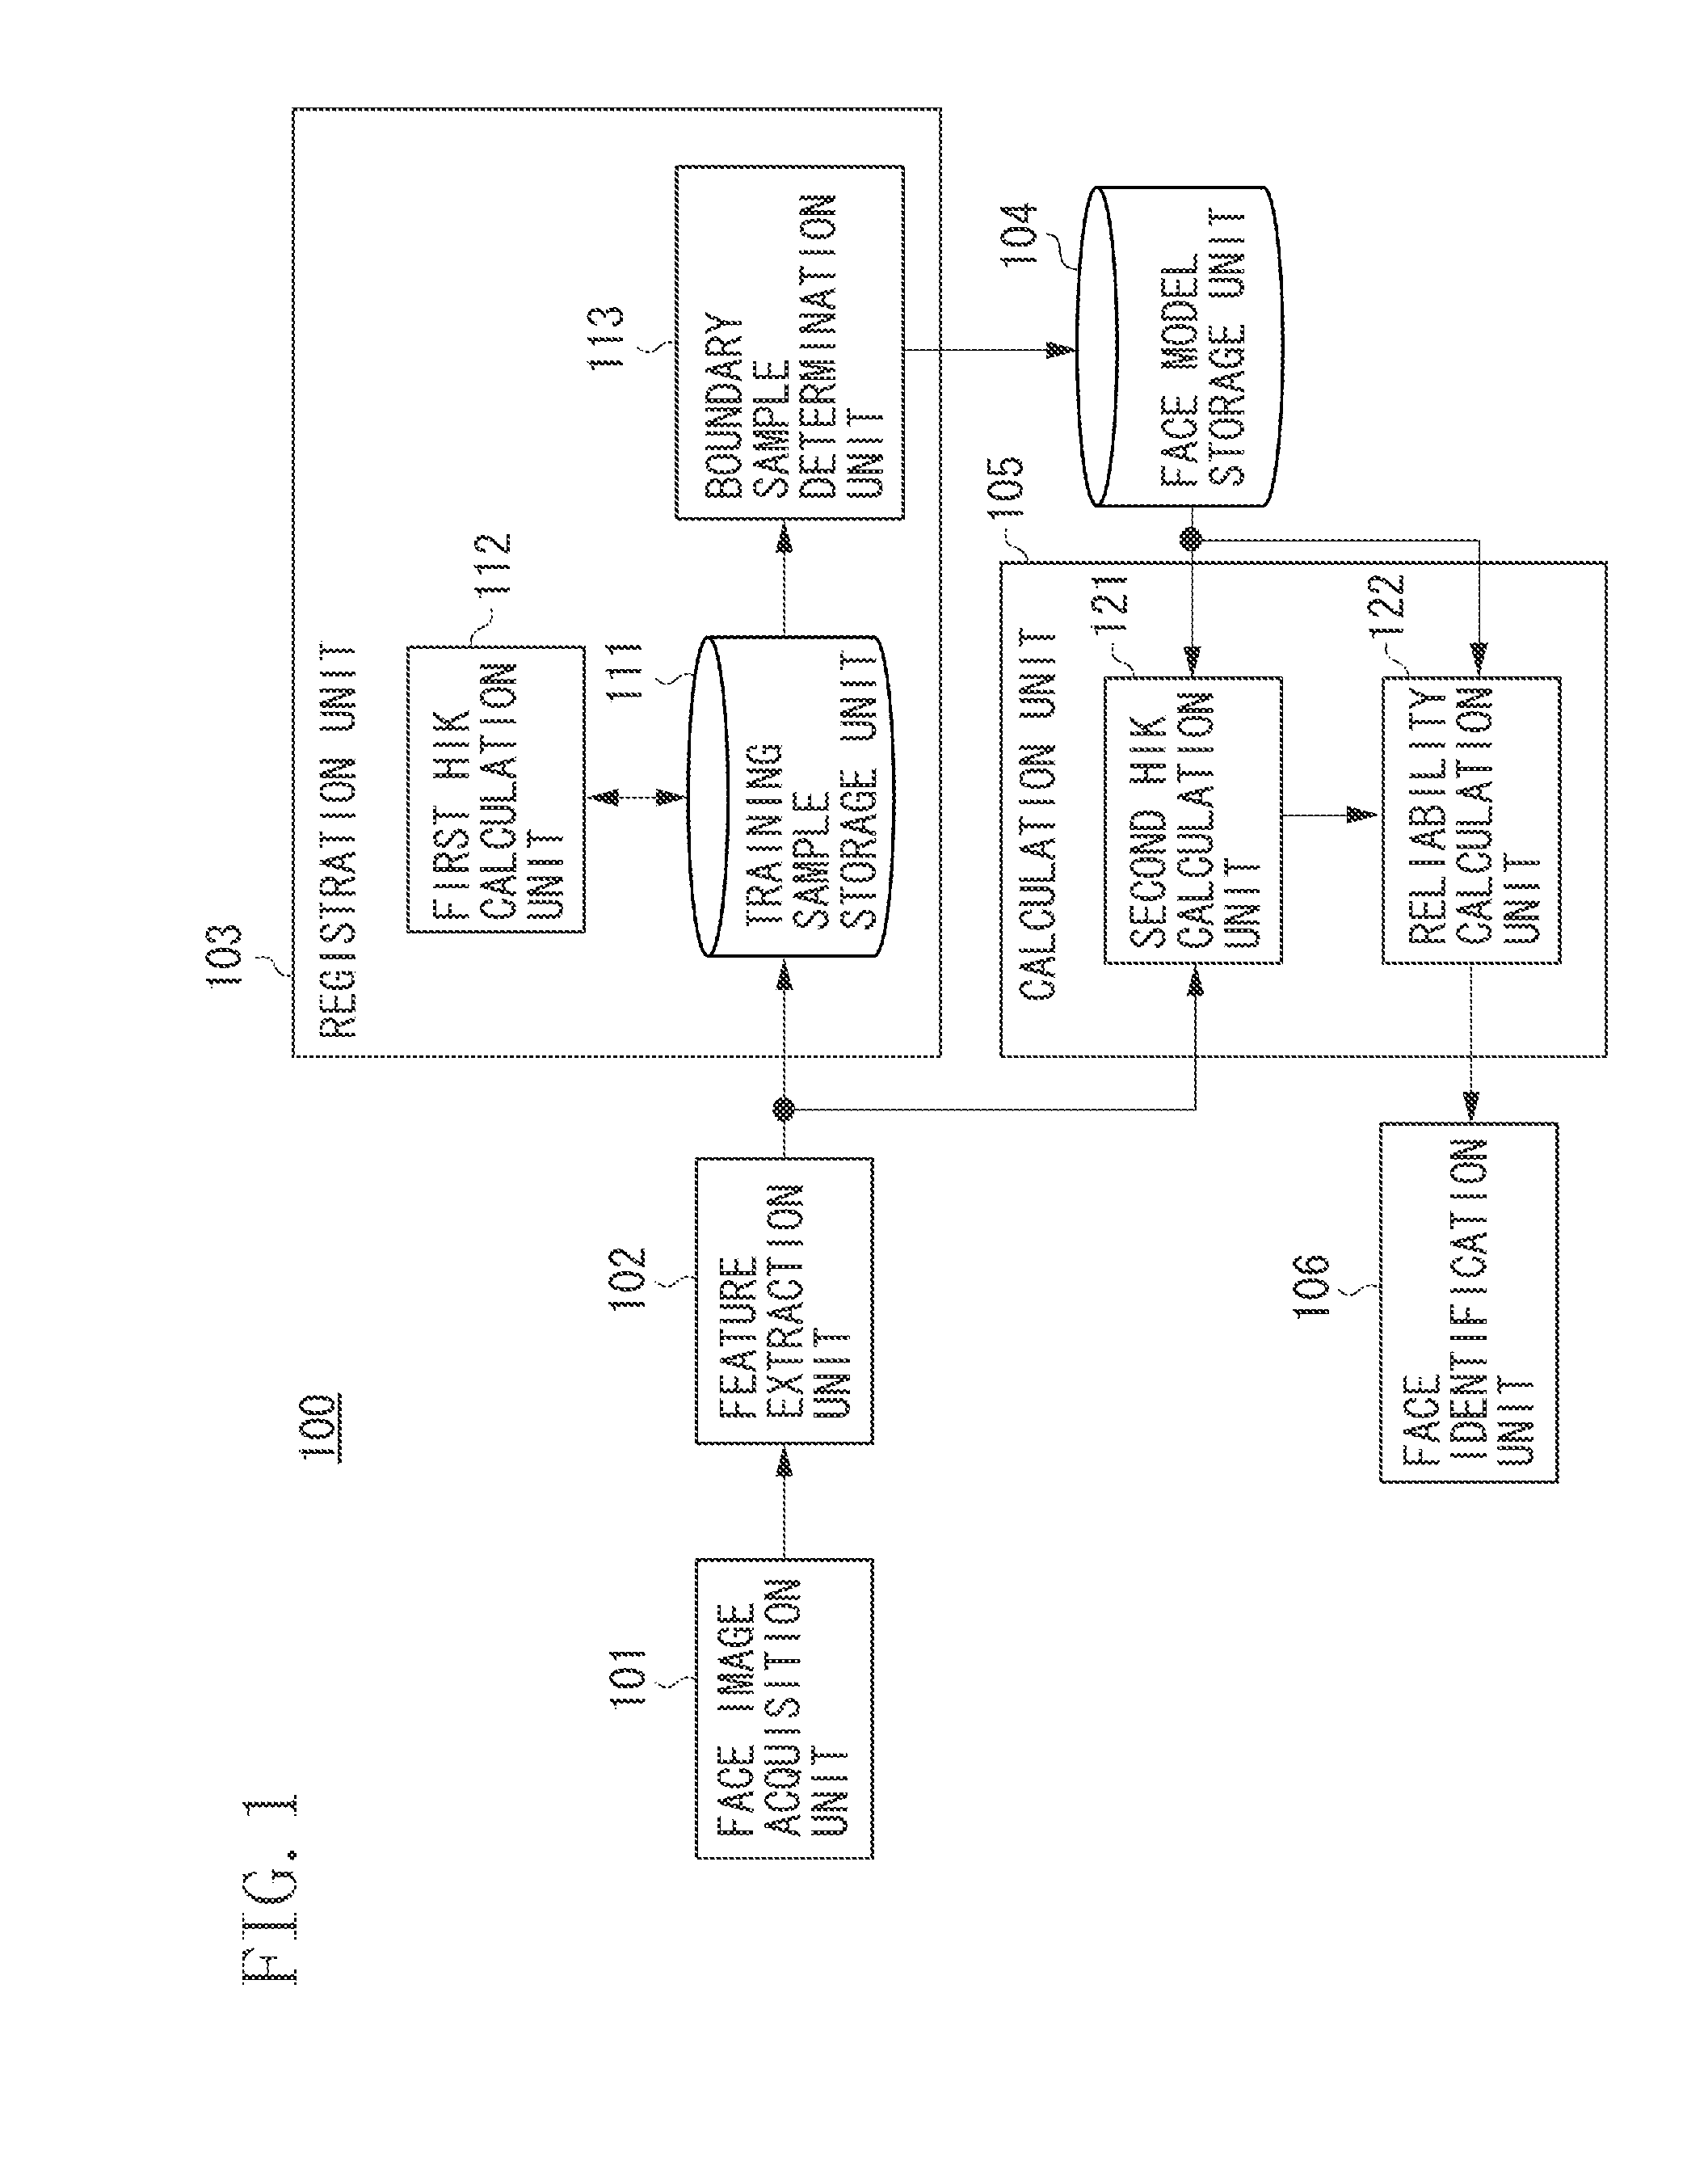 Image recognition apparatus and image recognition method for identifying object